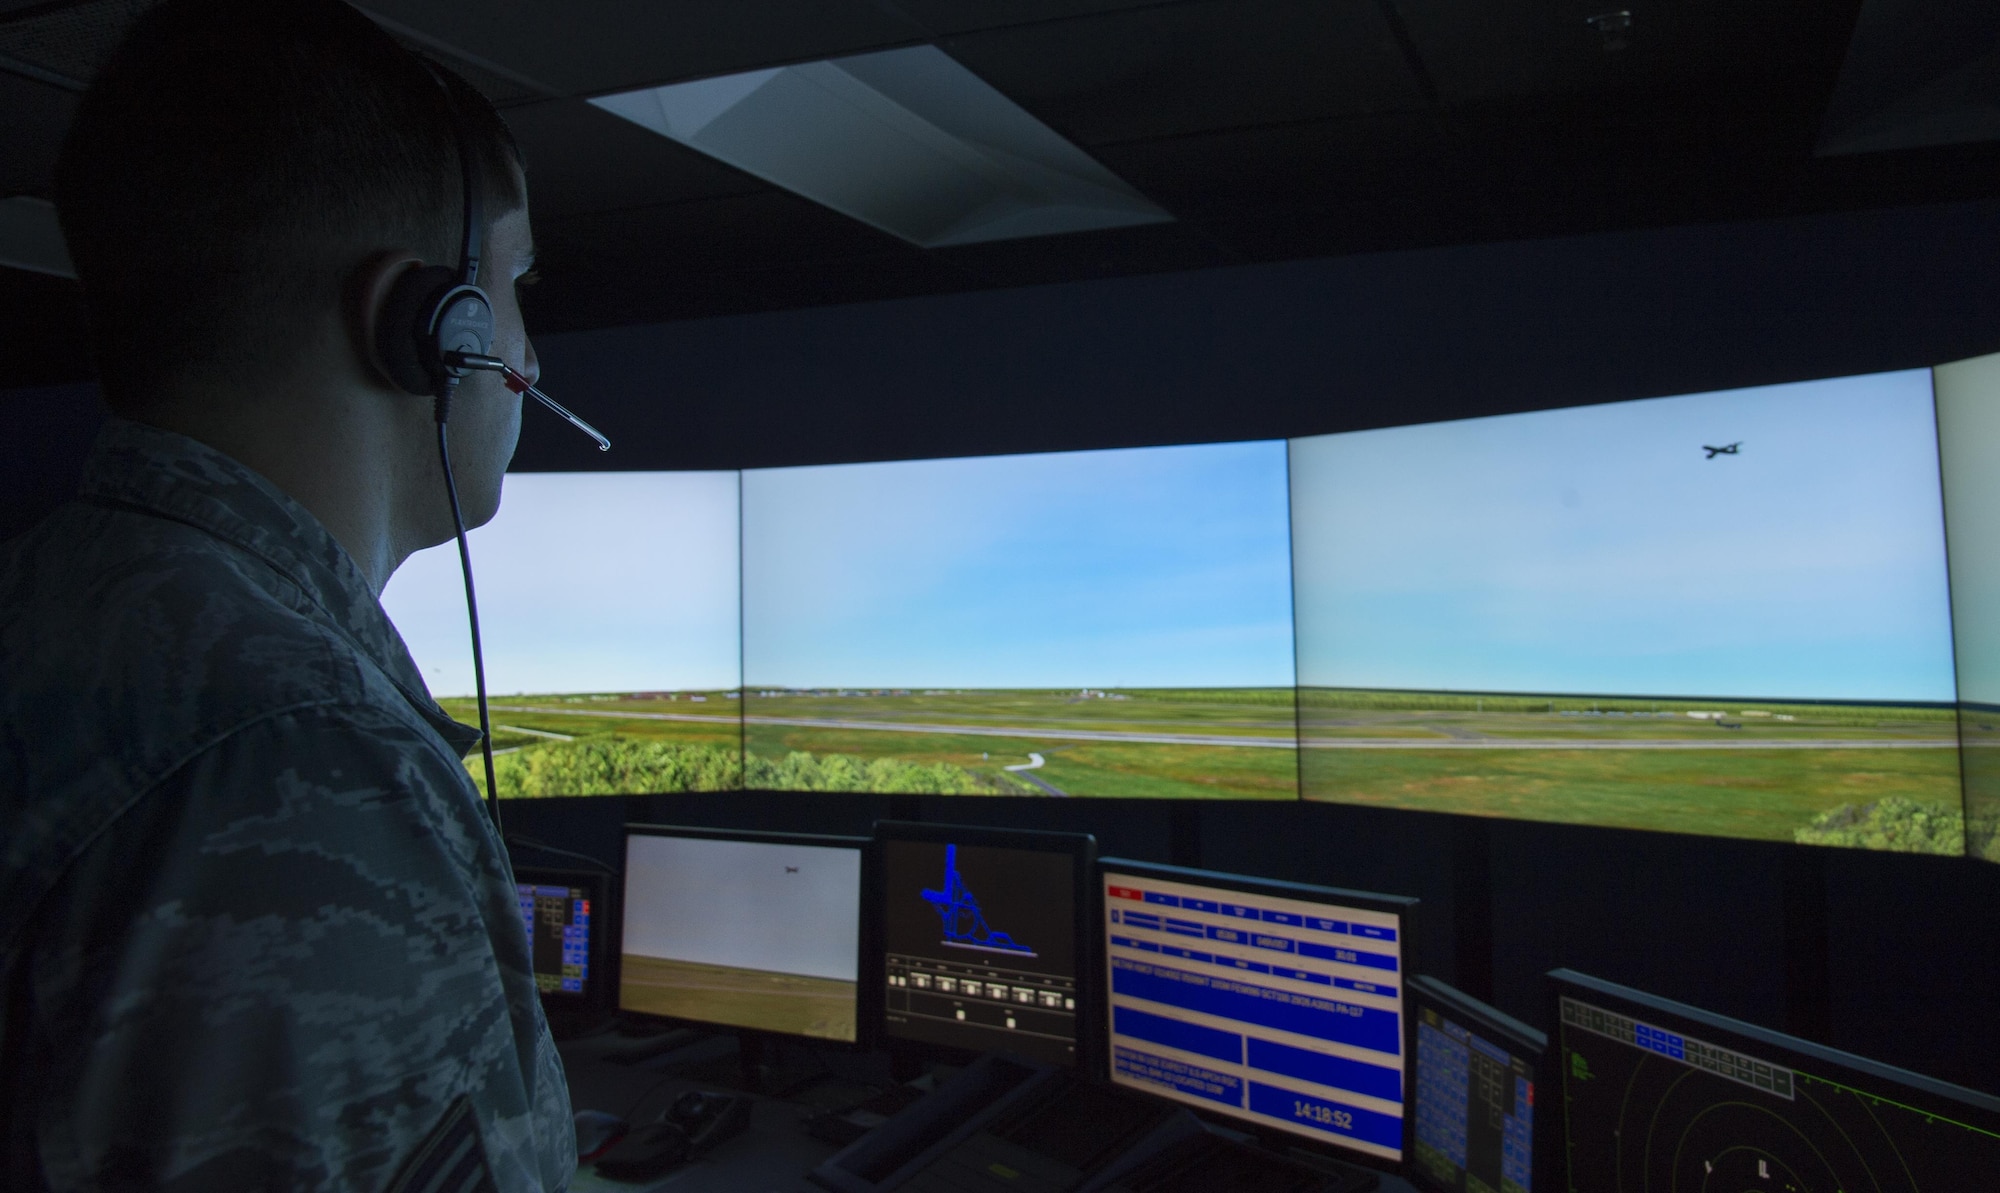 U.S. Air Force Senior Airman Vincent Magenti, an air traffic controller assigned to the 6th Operations Support Squadron, tracks an aircraft flying into the MacDill air space during a training scenario in the simulator at MacDill Air Force Base, Fla., Oct. 27, 2017. Air traffic controllers are responsible for monitoring the air space to keep missions running safely and effectively. (U.S. Air Force photo by Senior Airman Mariette Adams)